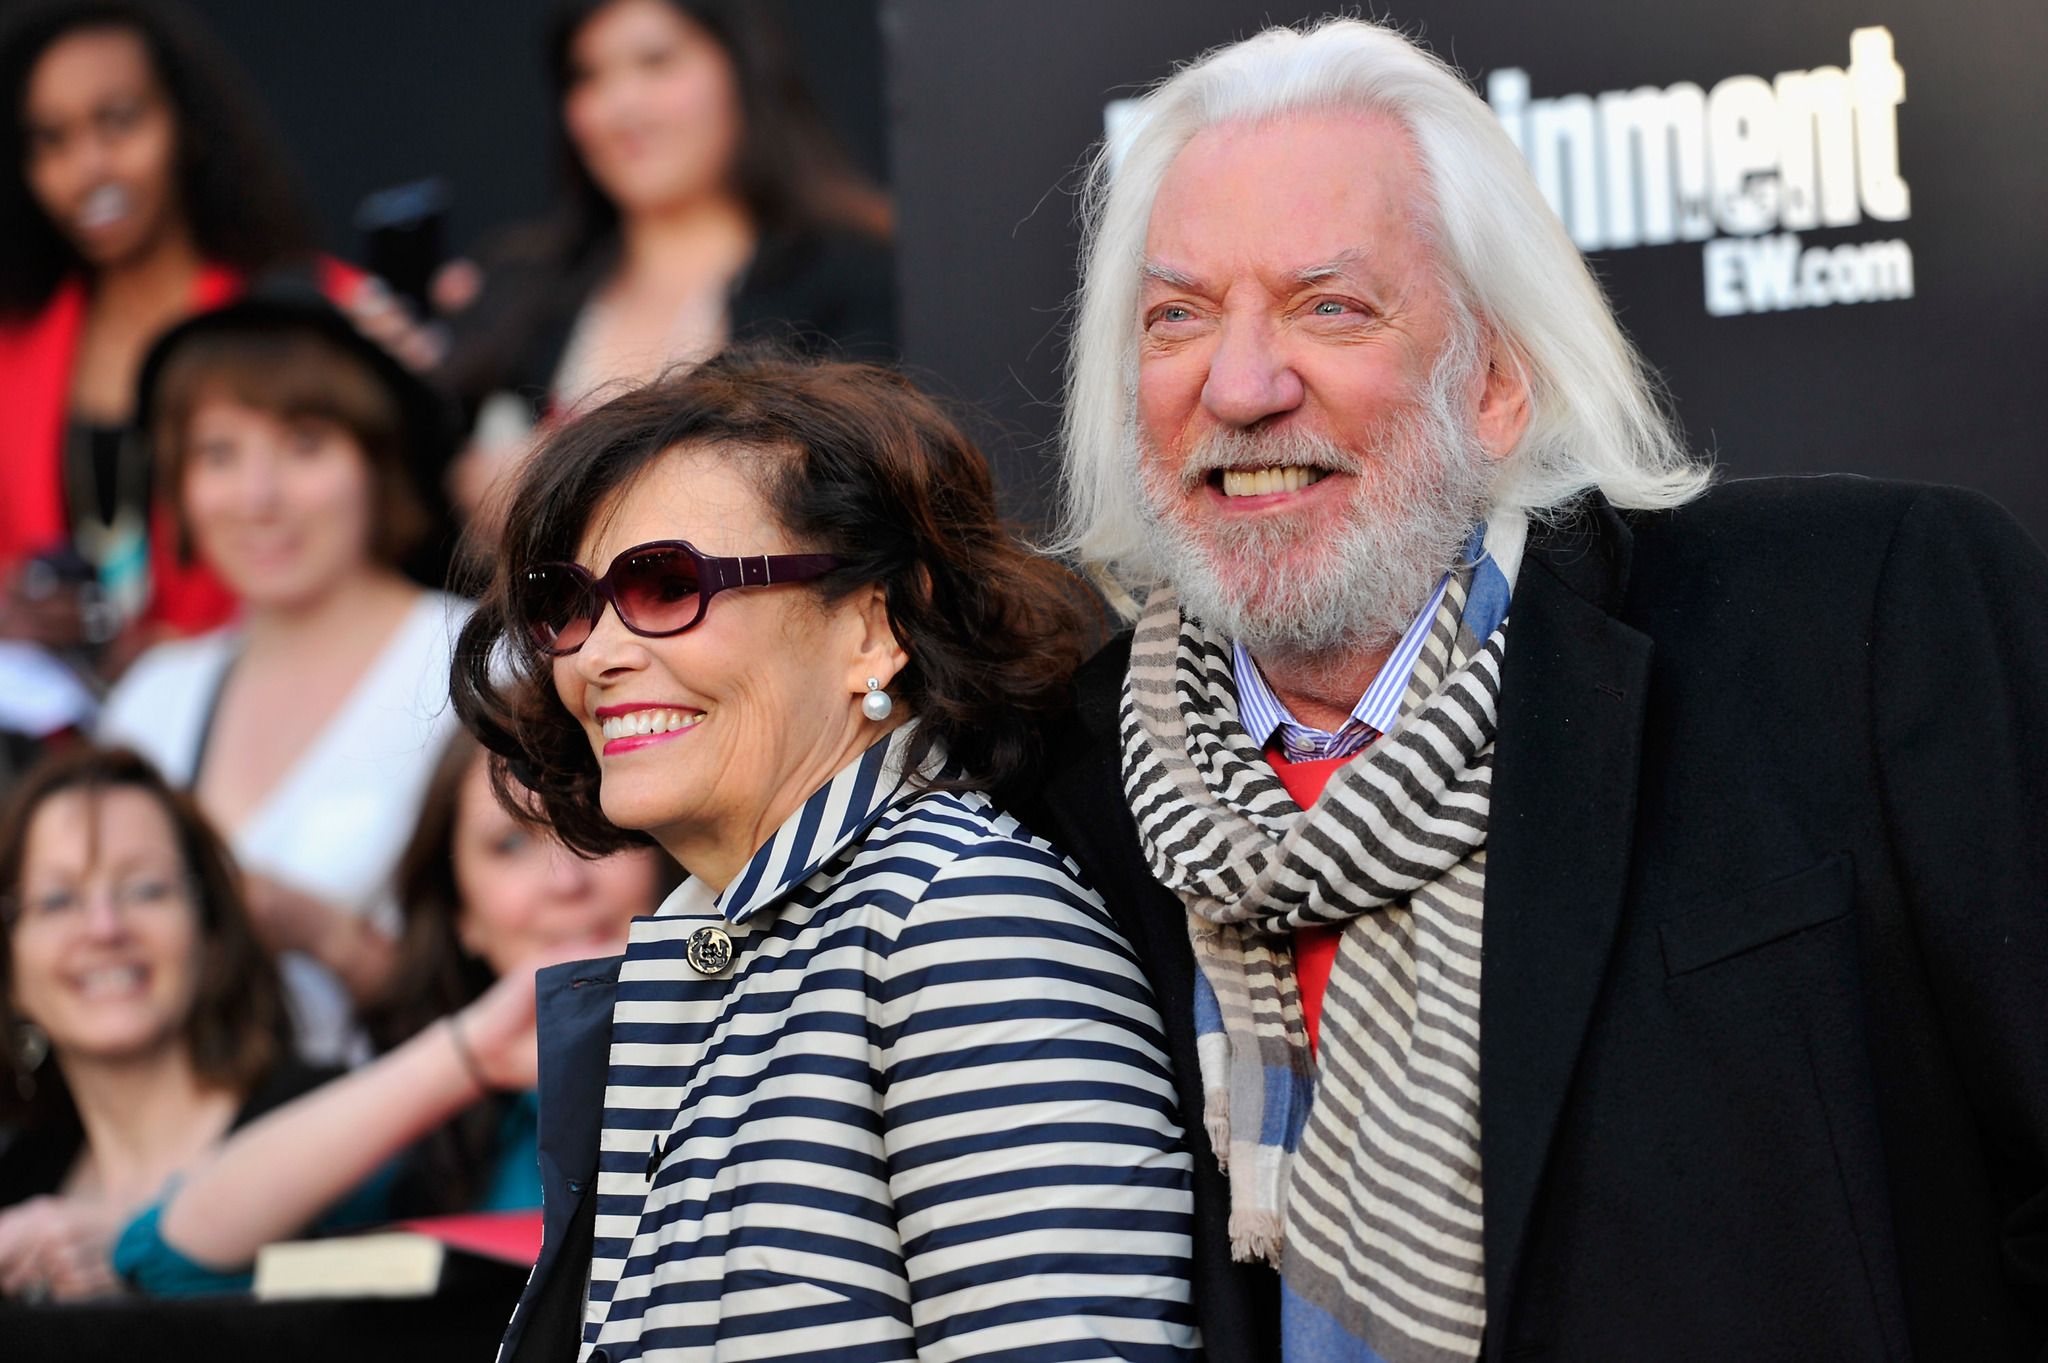 Donald Sutherland and Francine Racette